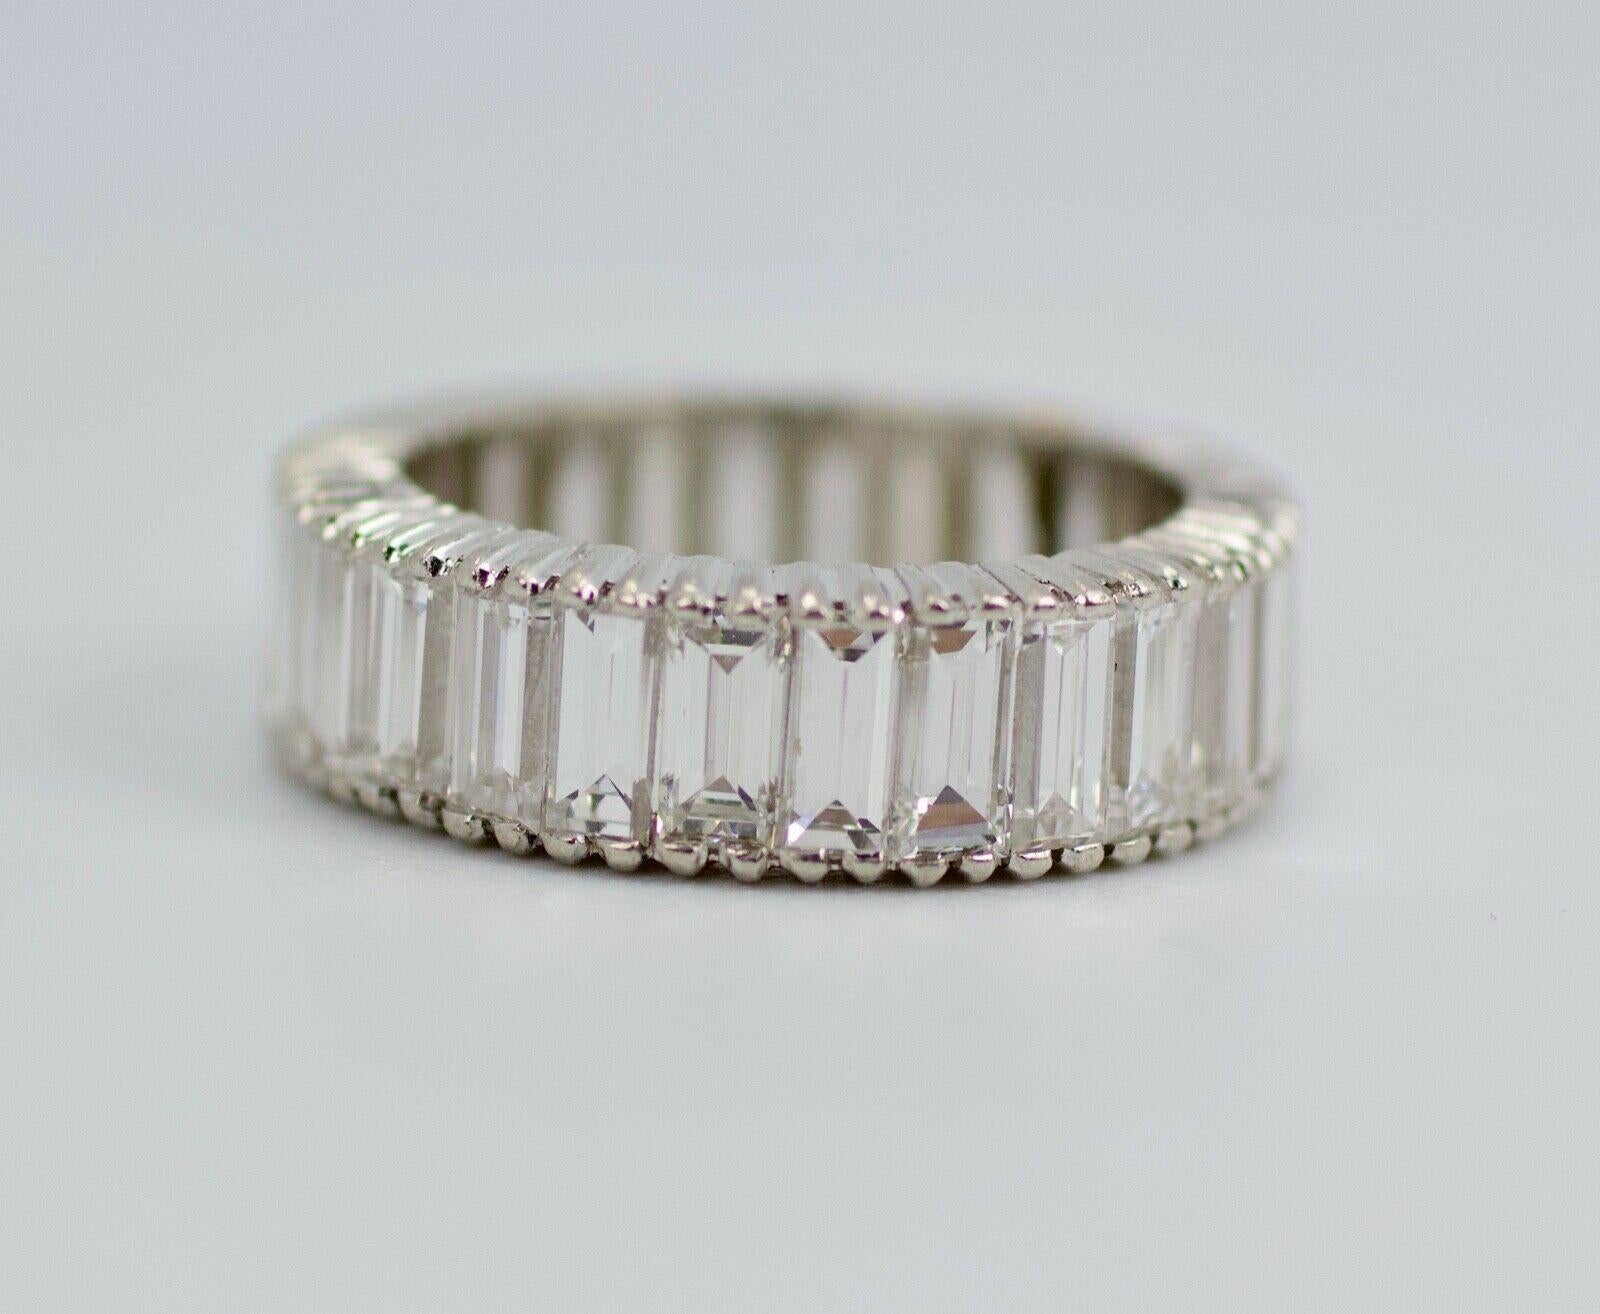 Platinum White Baguette Cut Diamond Eternity Band
Ring Size 5
5.0 Grams
Baguette Cut White Diamonds Approximately 3.00 Carats Total Weight
Color: F-G Clarity: Vs1


This is a stunning baguette eternity band. The diamonds beauty can not be captured